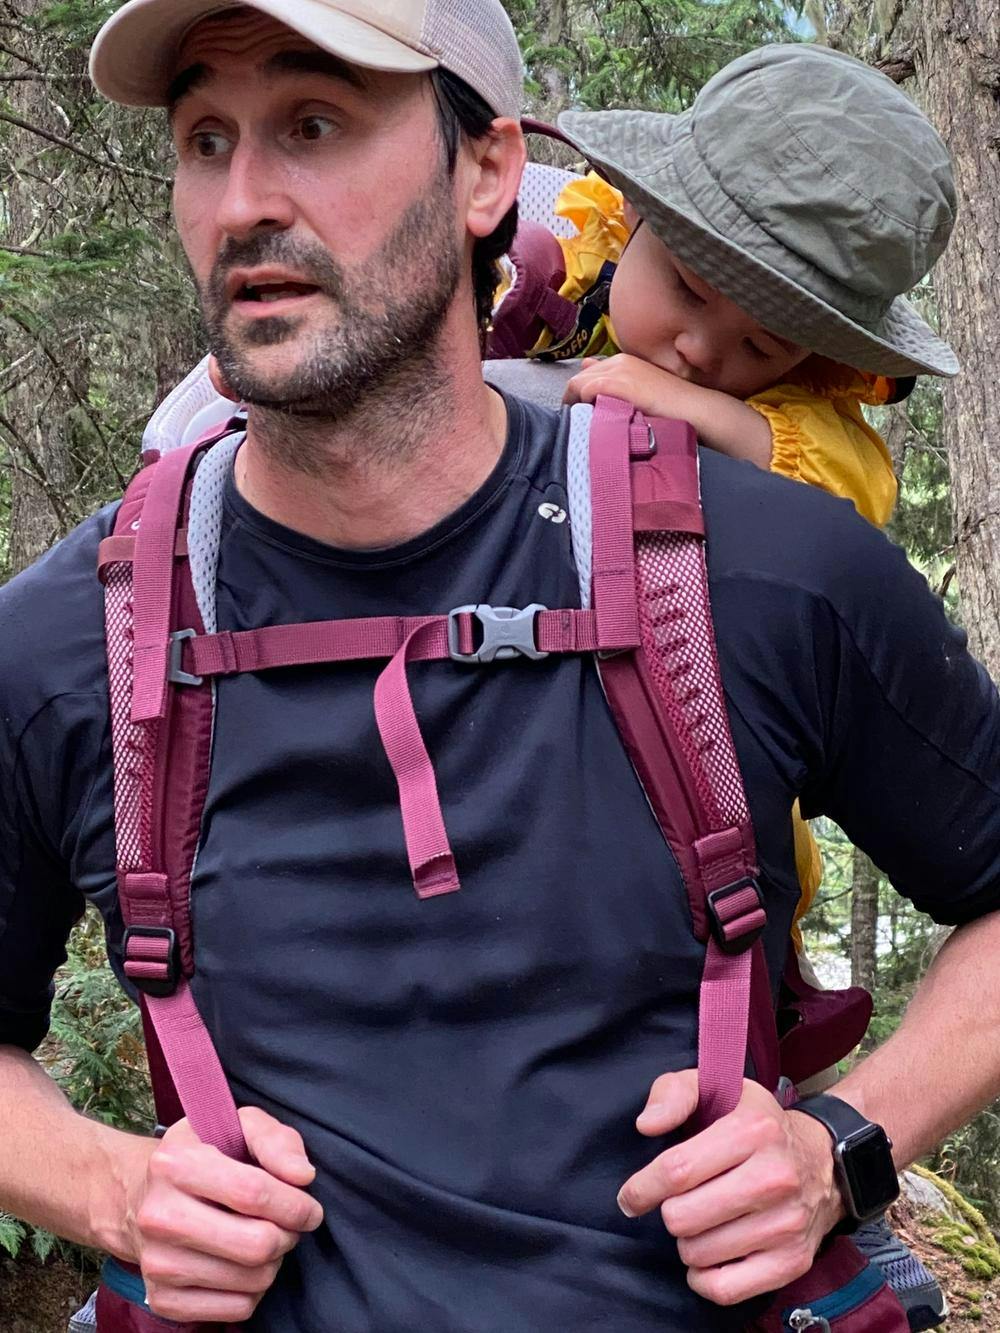 Rob's child asleep on his back during a hike